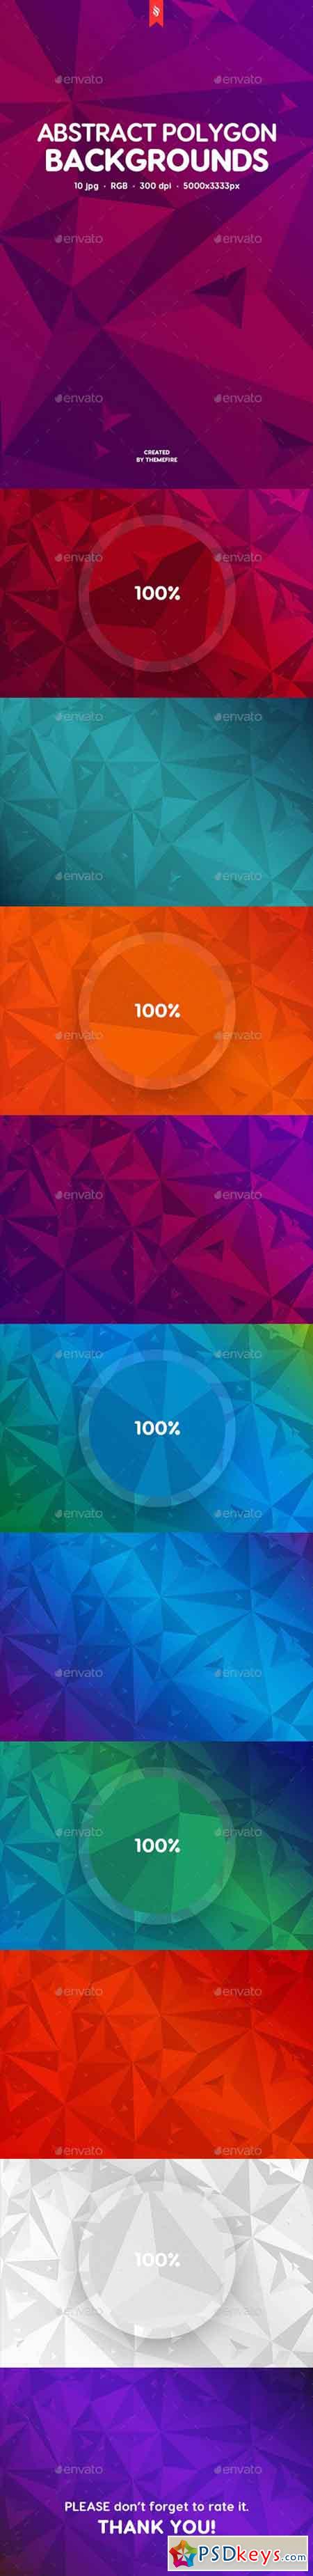 Abstract Polygonal Backgrounds 19680026